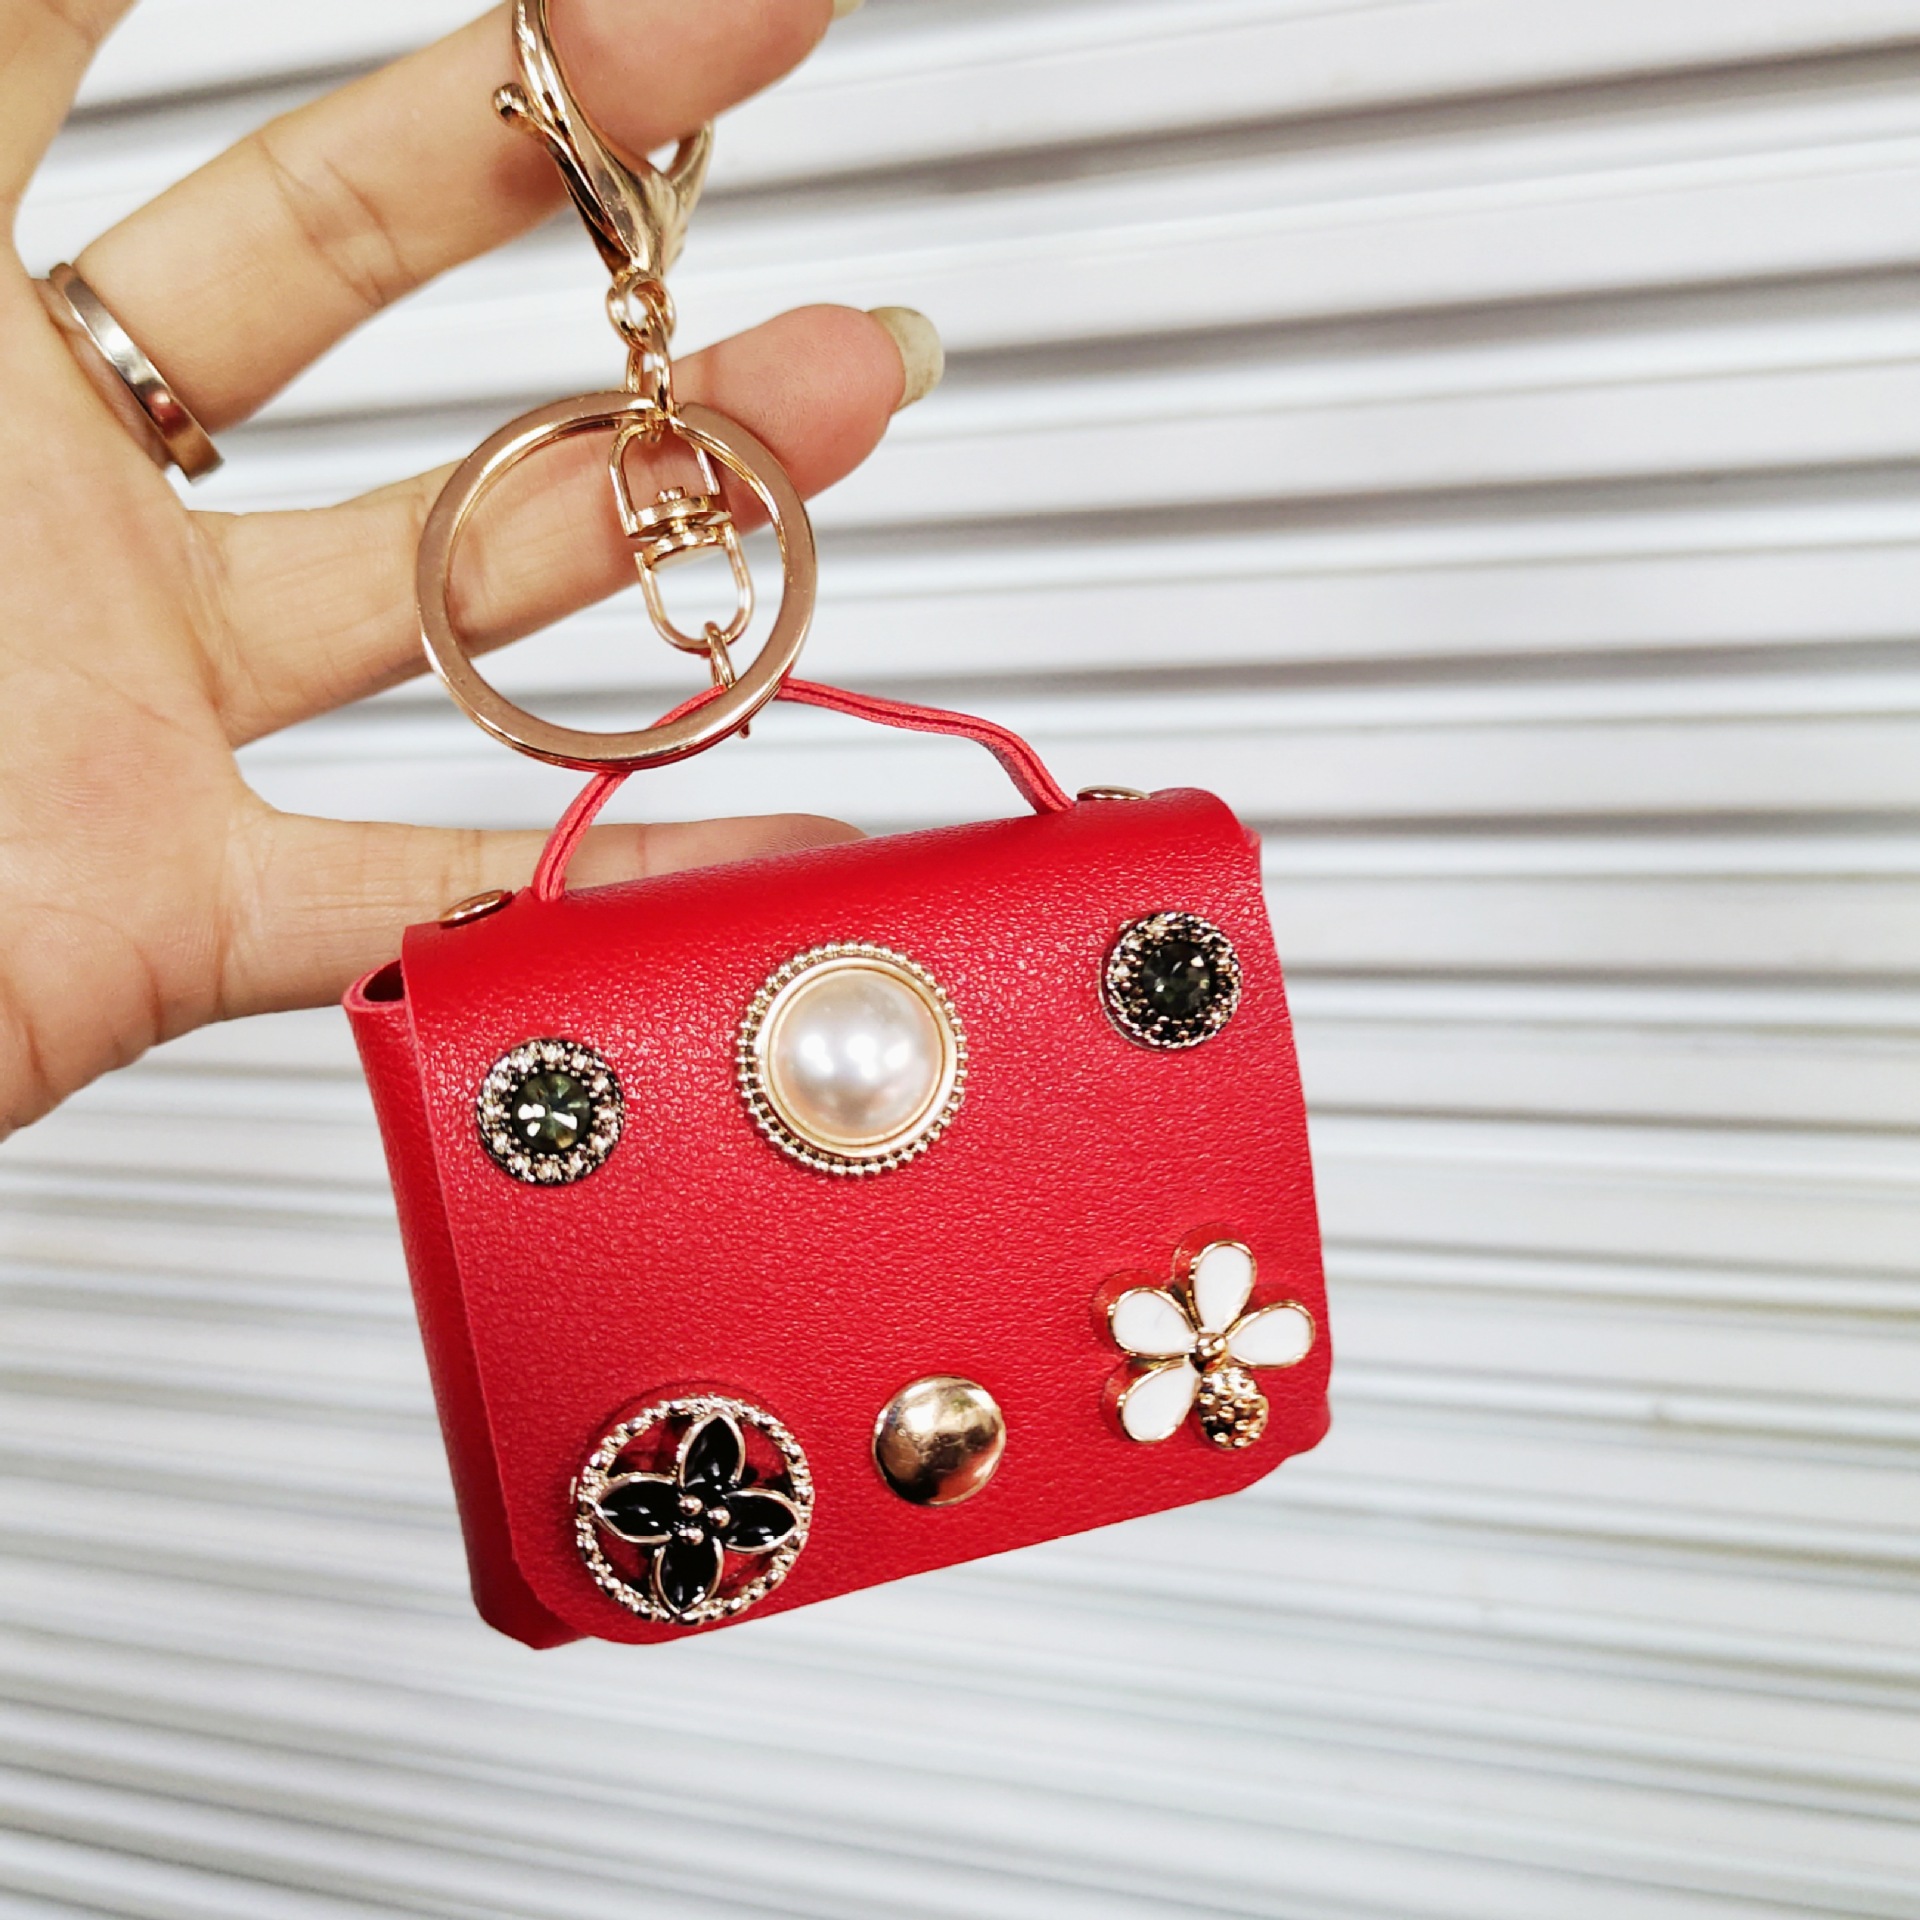 Factory in Stock Korean Version of Chanel's Style Mini Bag Headset Storage Bag Coin Purse Creative Bag Keychain Pendant